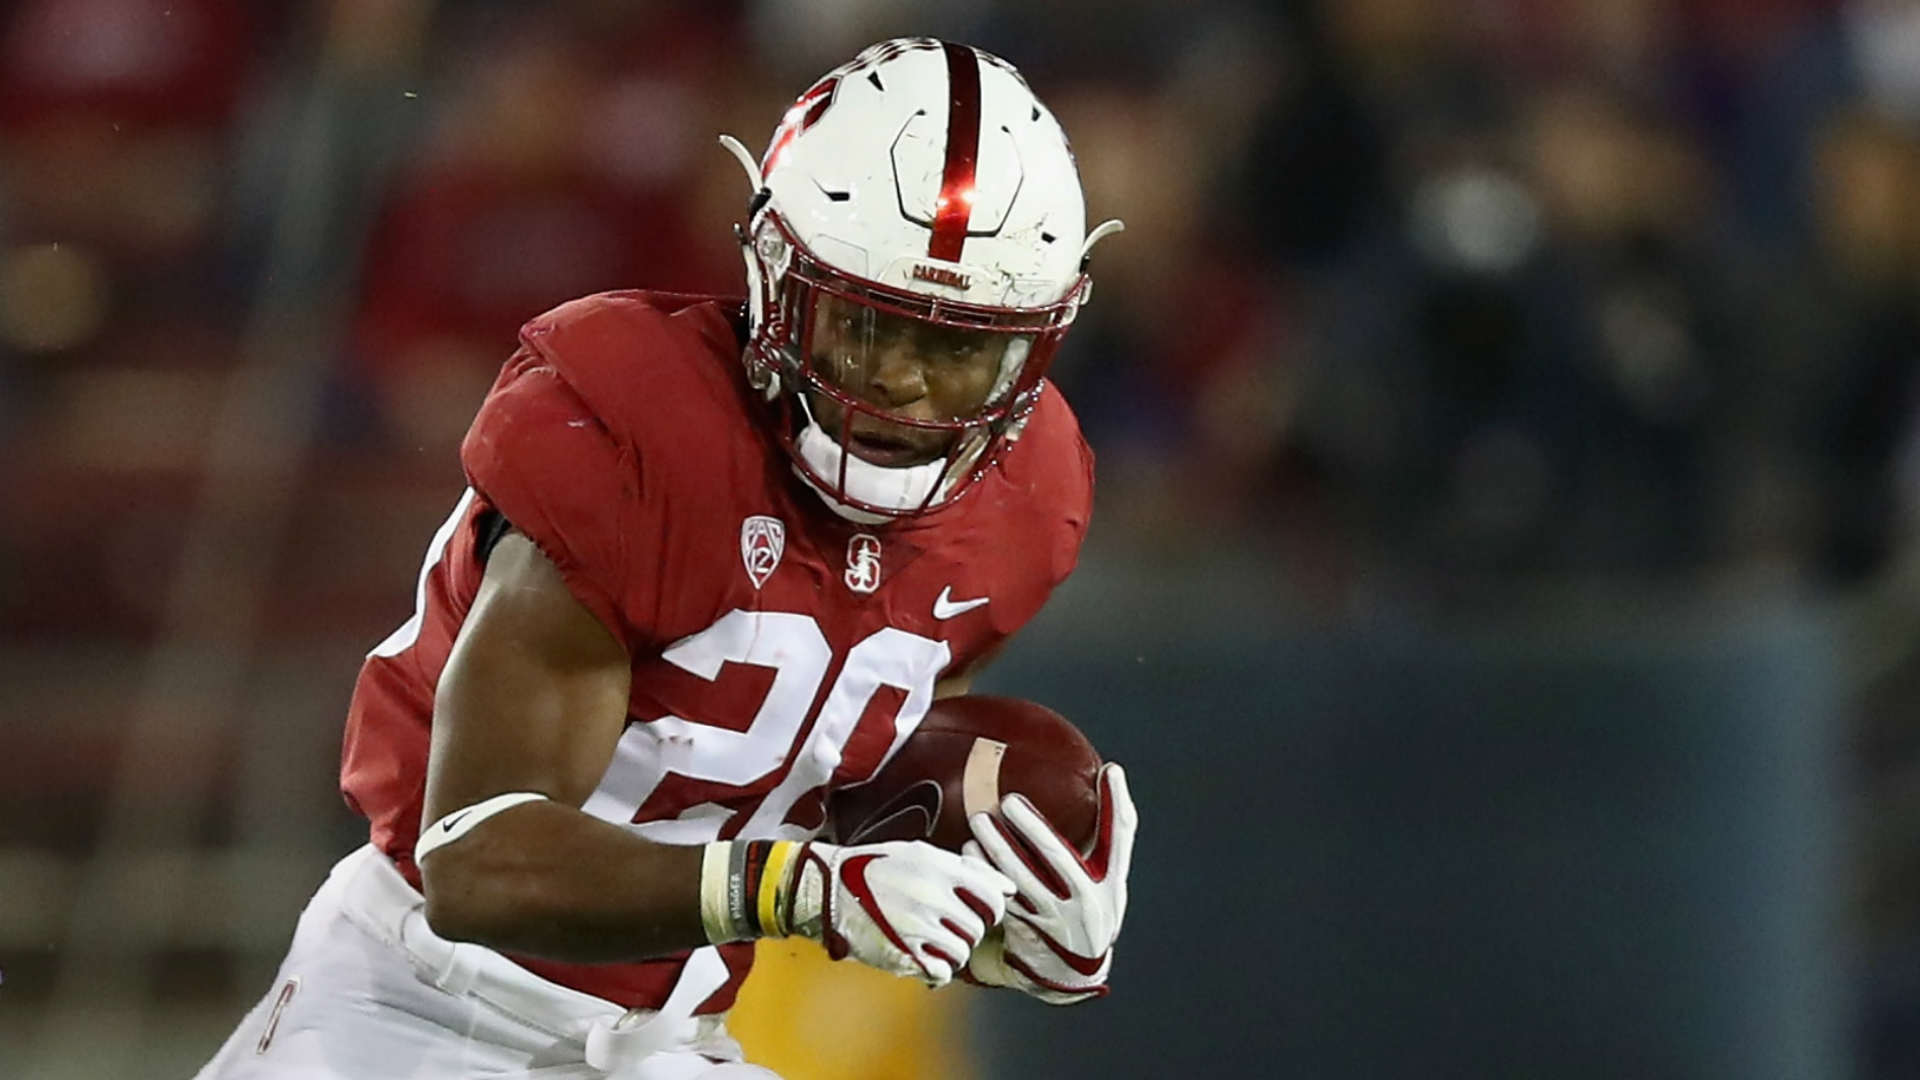 NFL Draft 2019: Bryce Love reveals he tore his ACL in final Stanford game